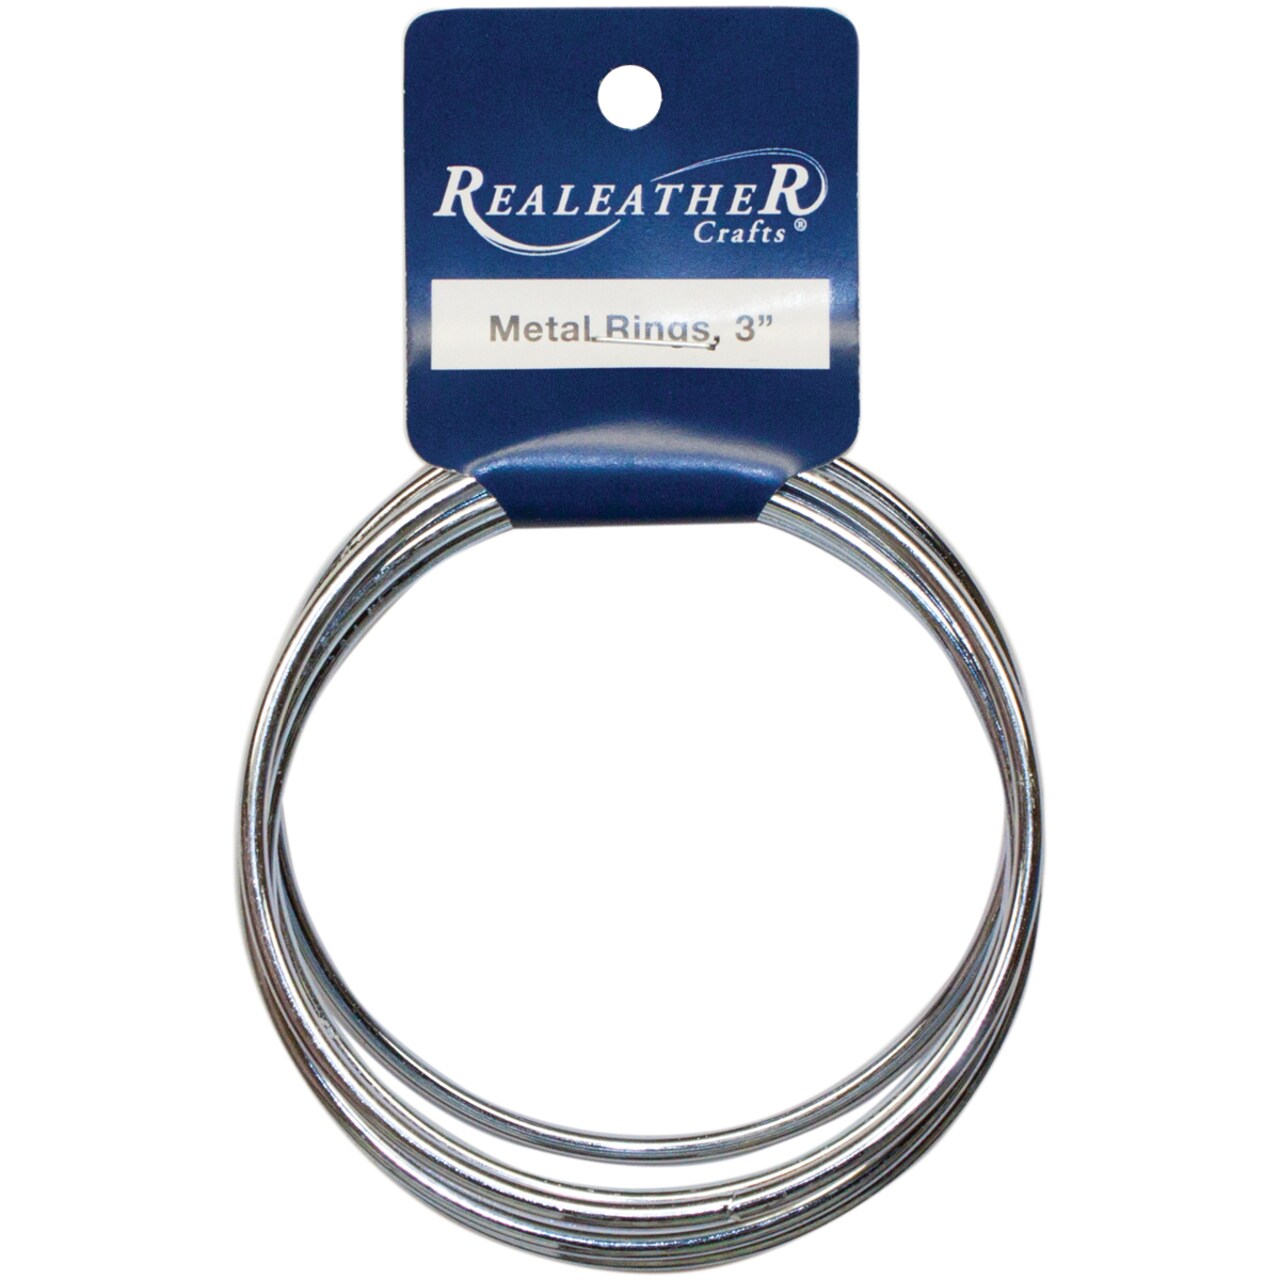 Realeather Crafts Zinc Metal Rings